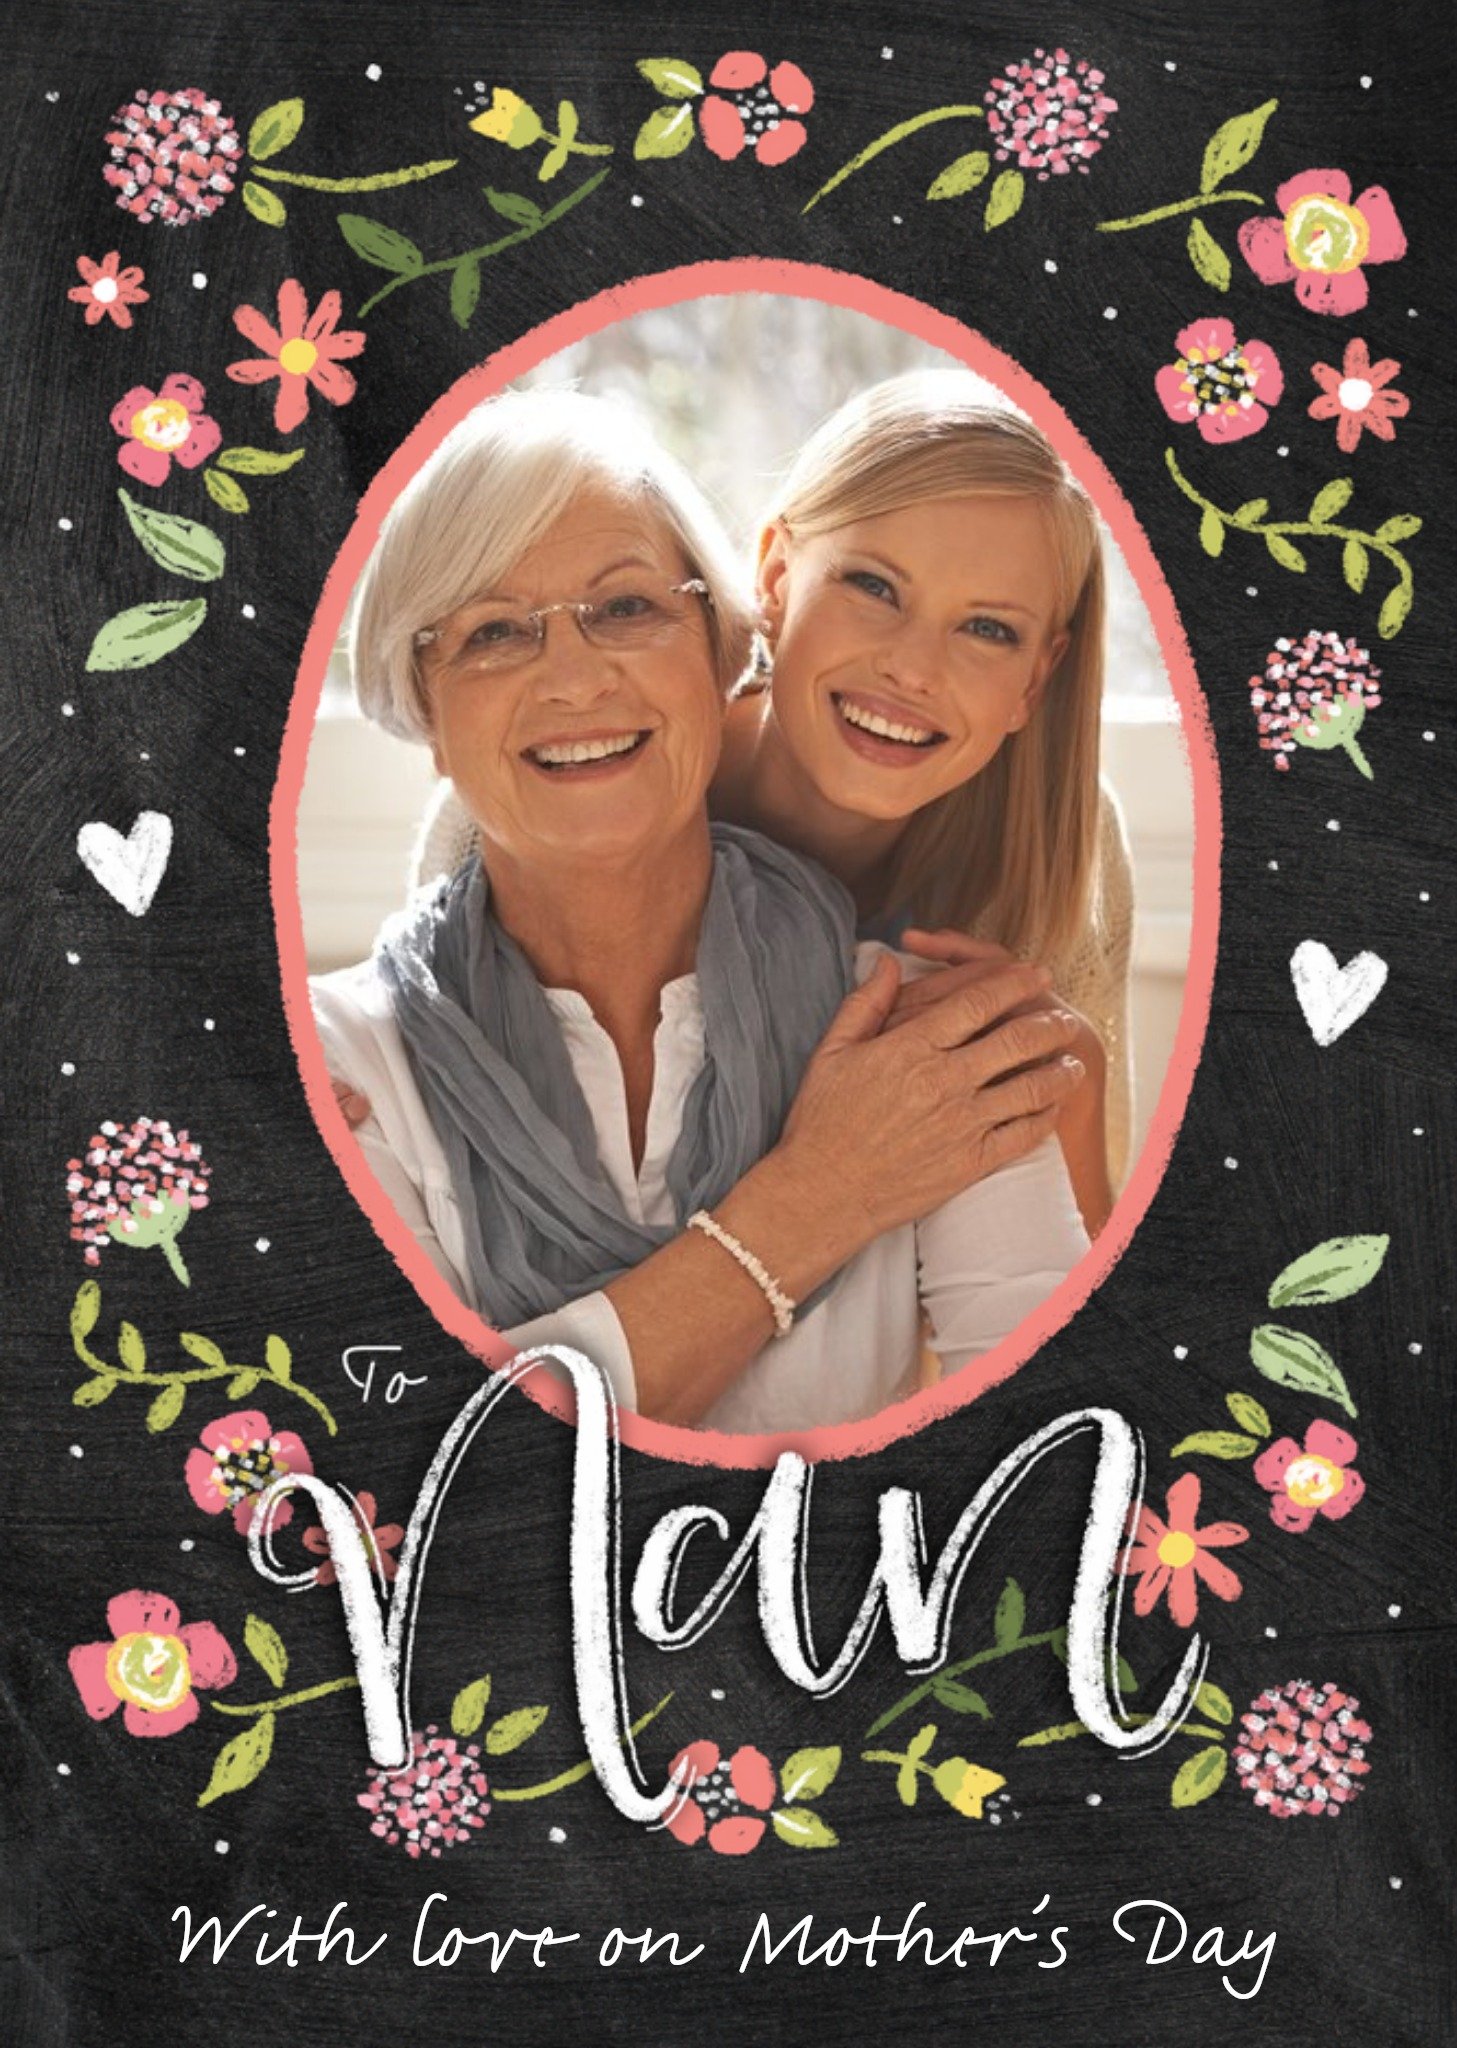 Moonpig Peony Print Nan With Love On Mother's Day Photo Card, Large